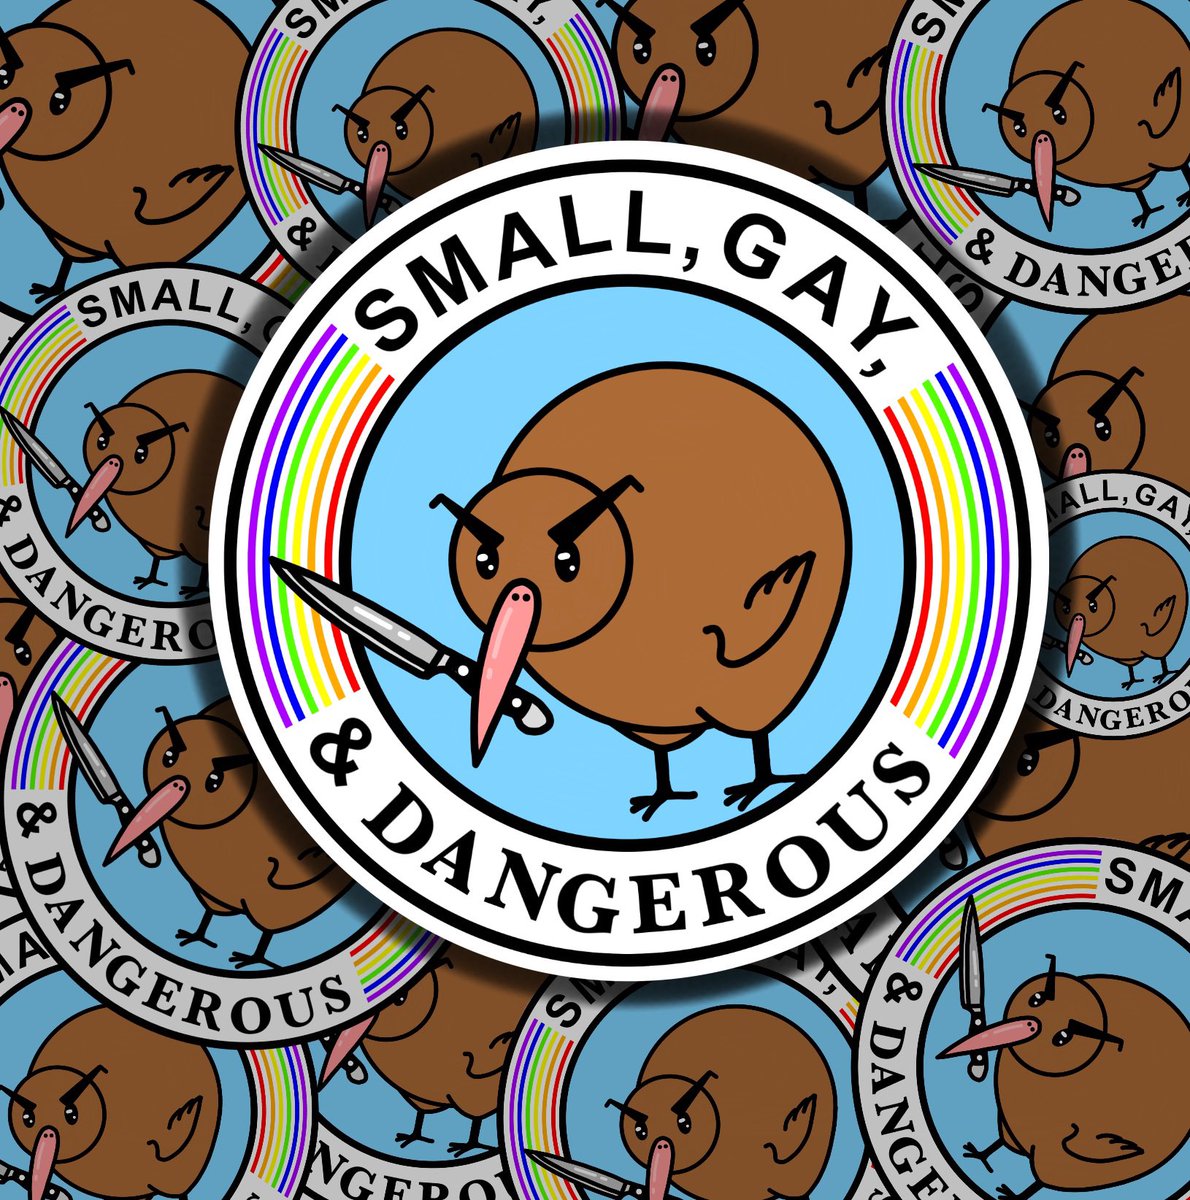 Also added this little guy for preorder as well! It’ll be a 2” sticker available rn for preorder price. Once they arrive the price will go up. 🌈“Small, Gay, & Dangerous” 🔪 jblossomart.com